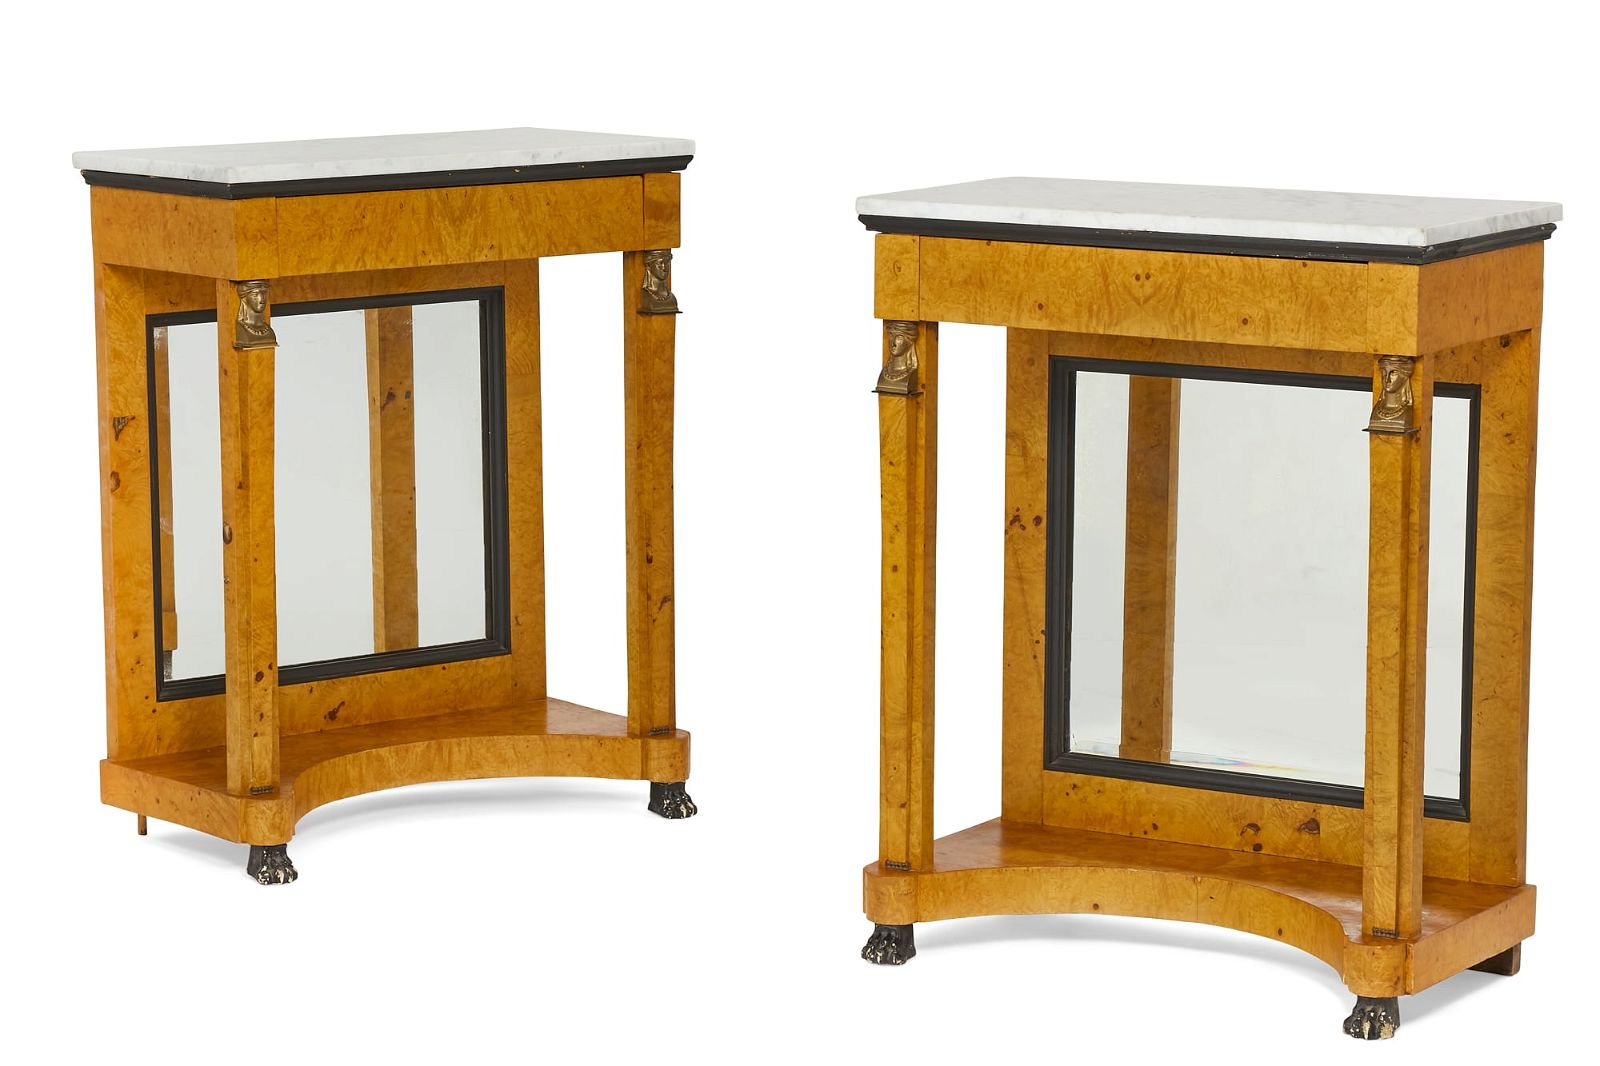 A PAIR OF NEOCLASSICAL STYLE CONSOLE